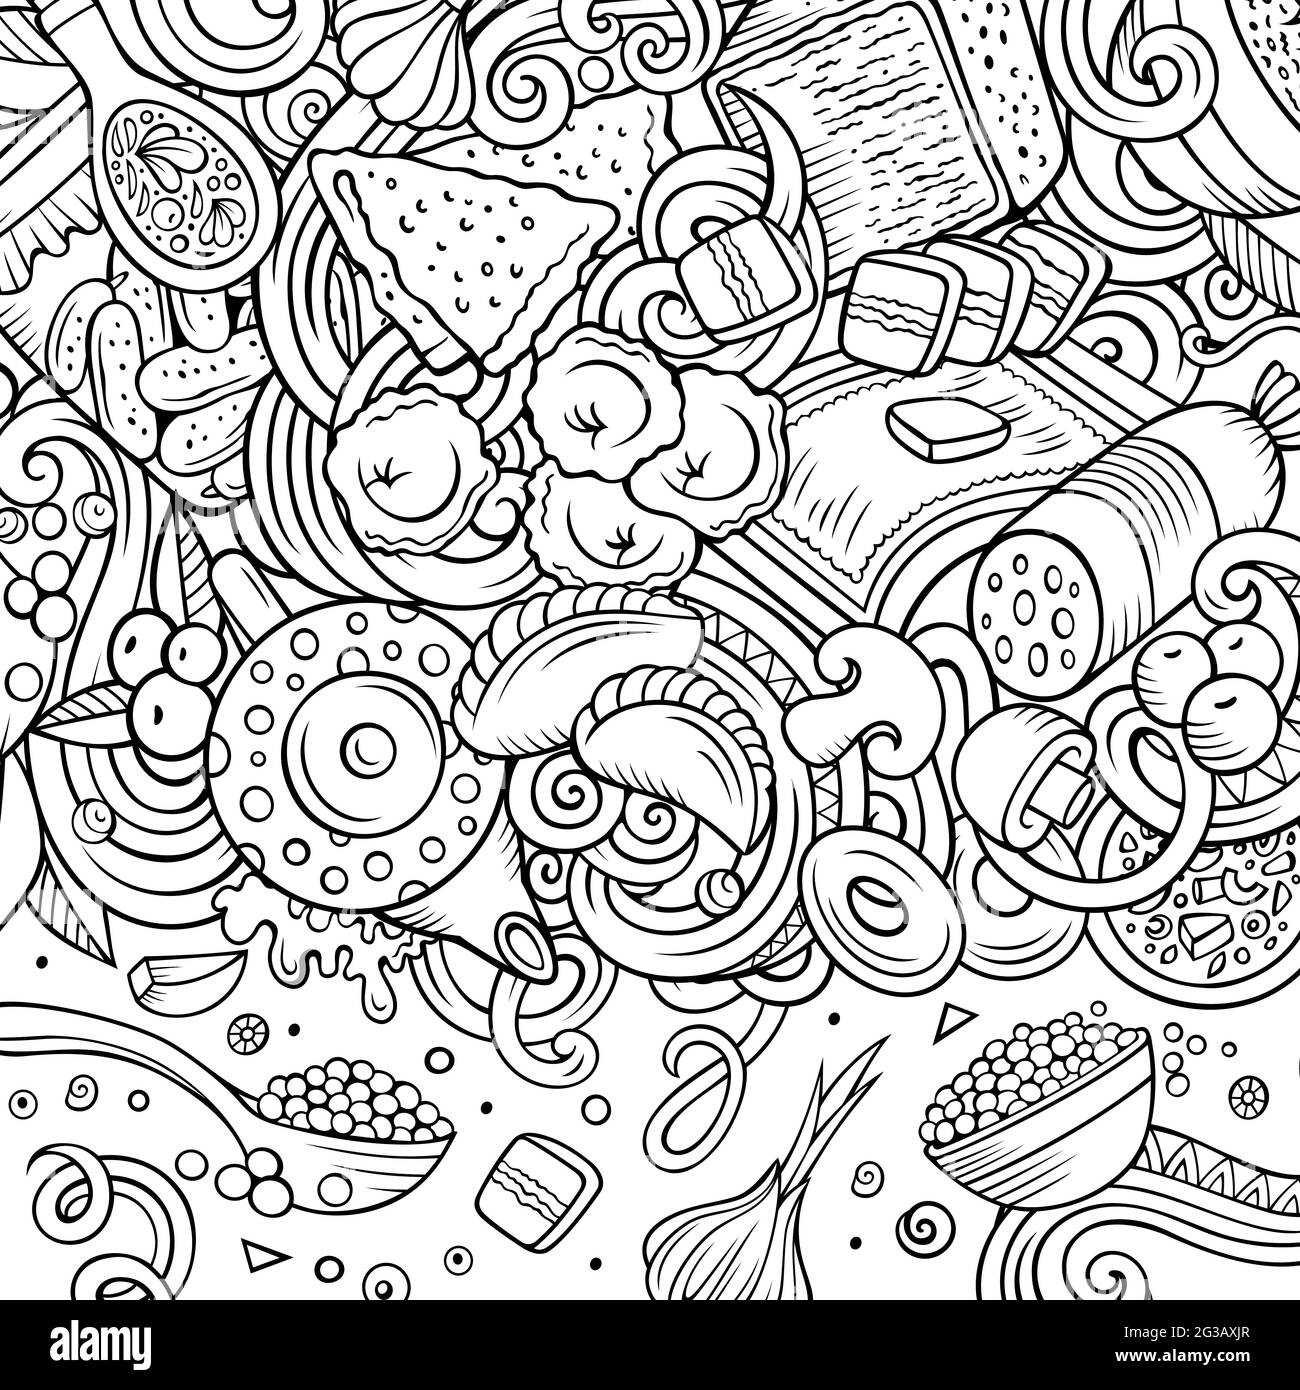 Cartoon vector doodles Russian food frame. Line art, detailed, with lots of objects background. All objects separate. Sketchy ukrainian cuisine funny Stock Vector